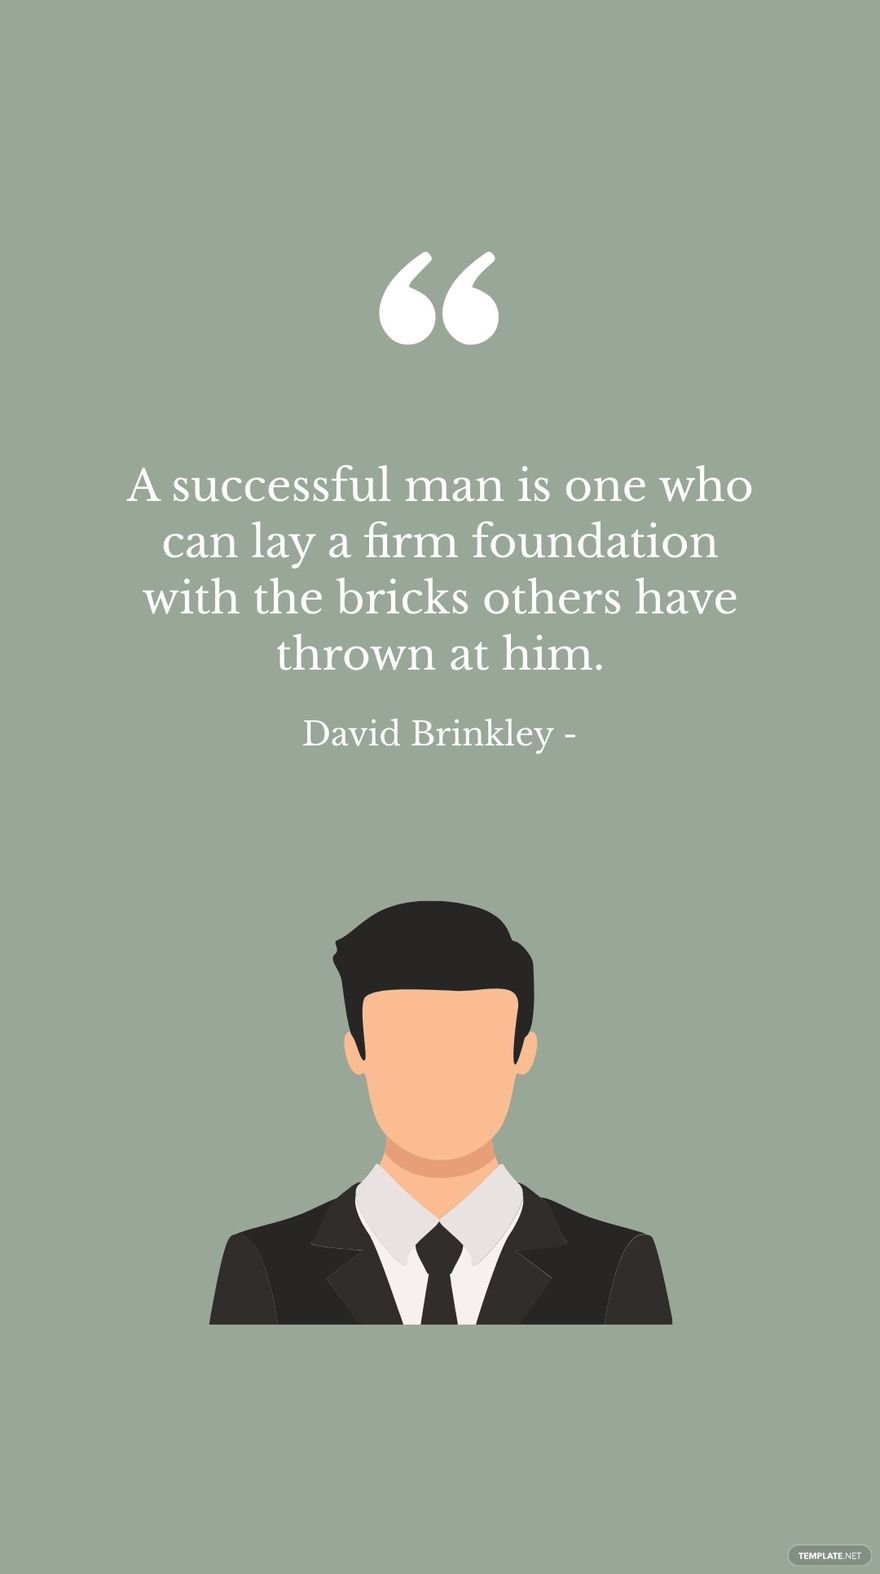 David Brinkley - A successful man is one who can lay a firm foundation with the bricks others have thrown at him. in JPG